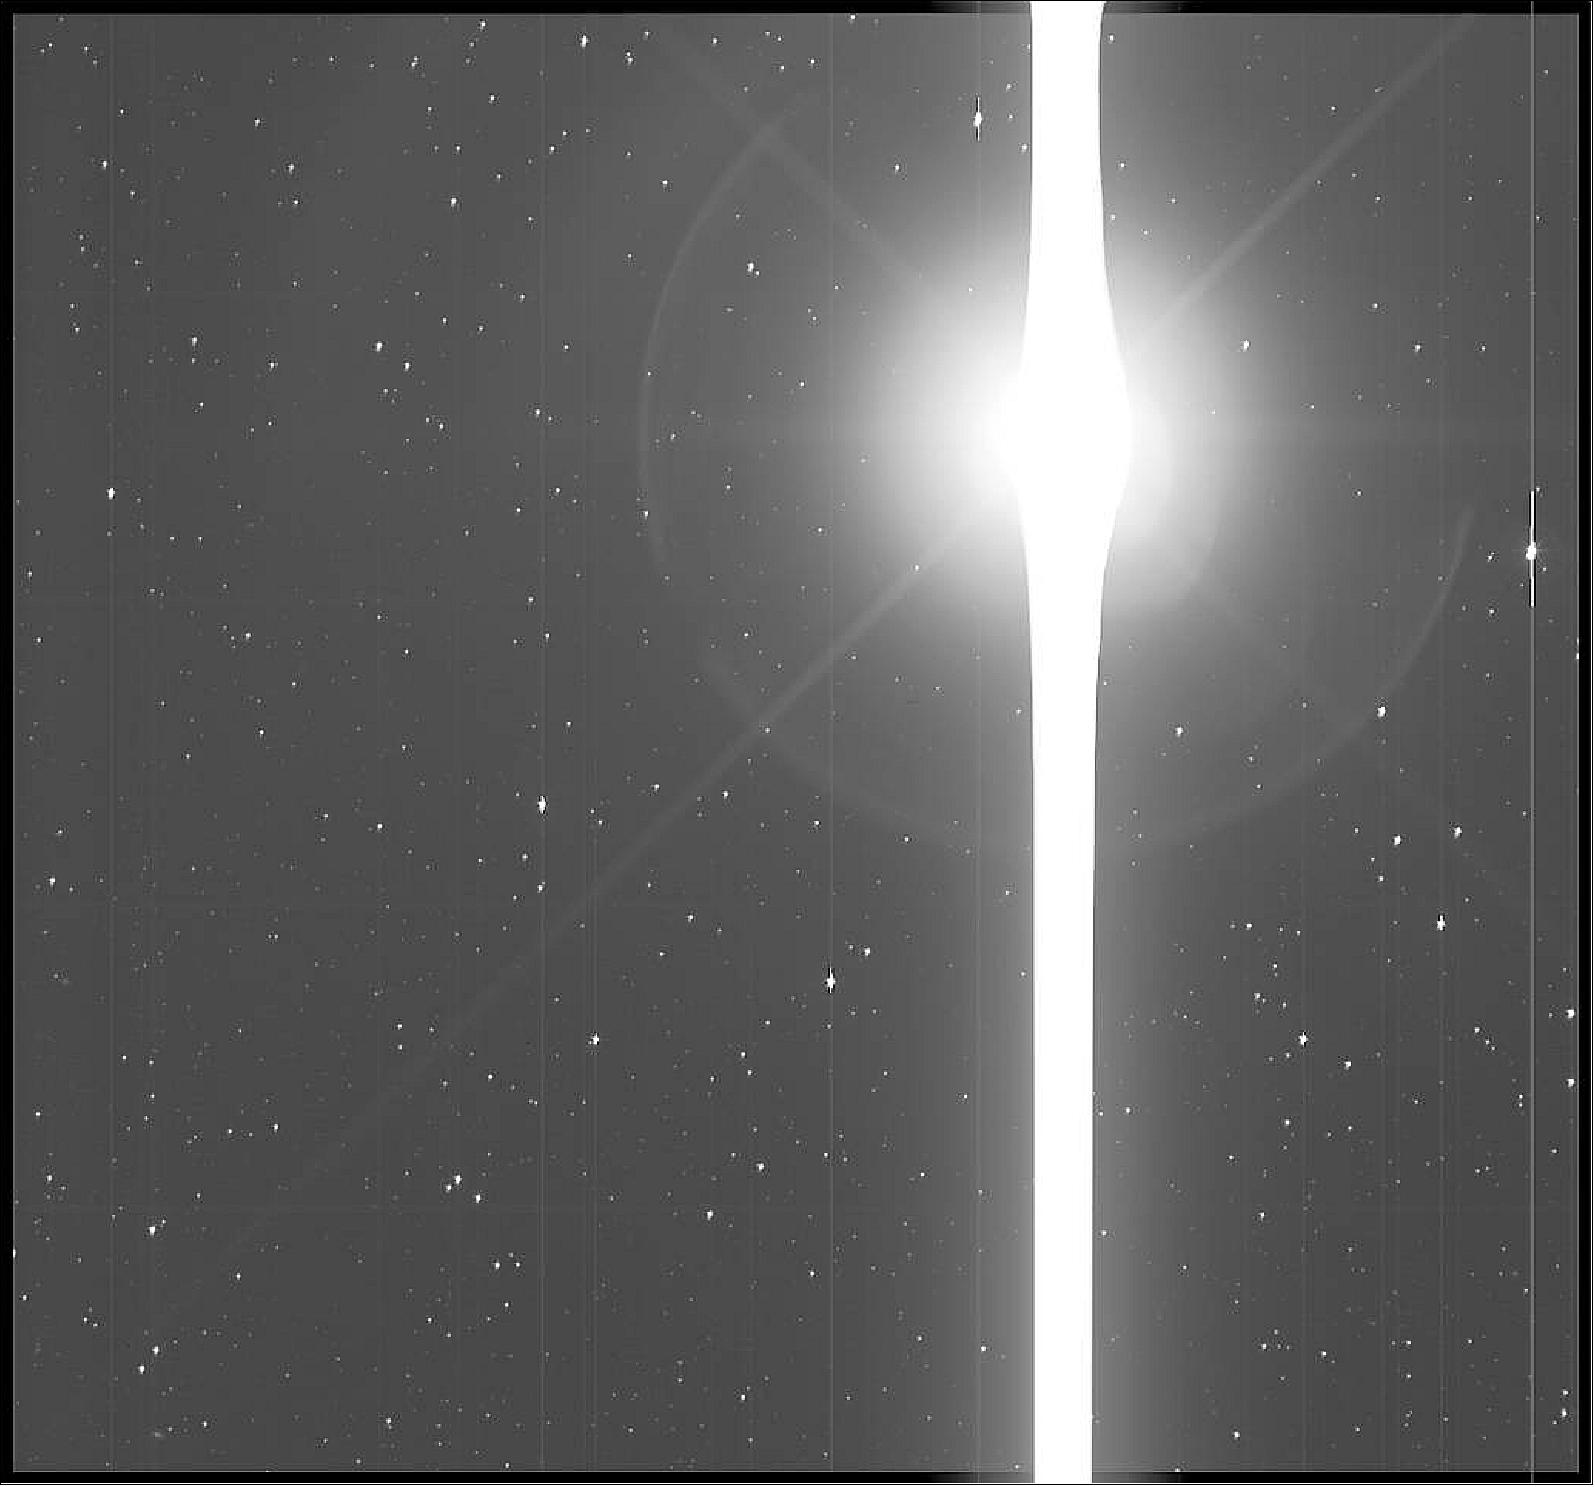 Figure 33: This Kepler image of Earth was recently beamed back home. Captured on Dec. 10, 2017 after the spacecraft adjusted its telescope to a new field of view, Earth’s reflection as it slipped past was so extraordinarily bright that it created a saber-like saturation bleed across the instrument’s sensors, obscuring the neighboring Moon (image credit: NASA)